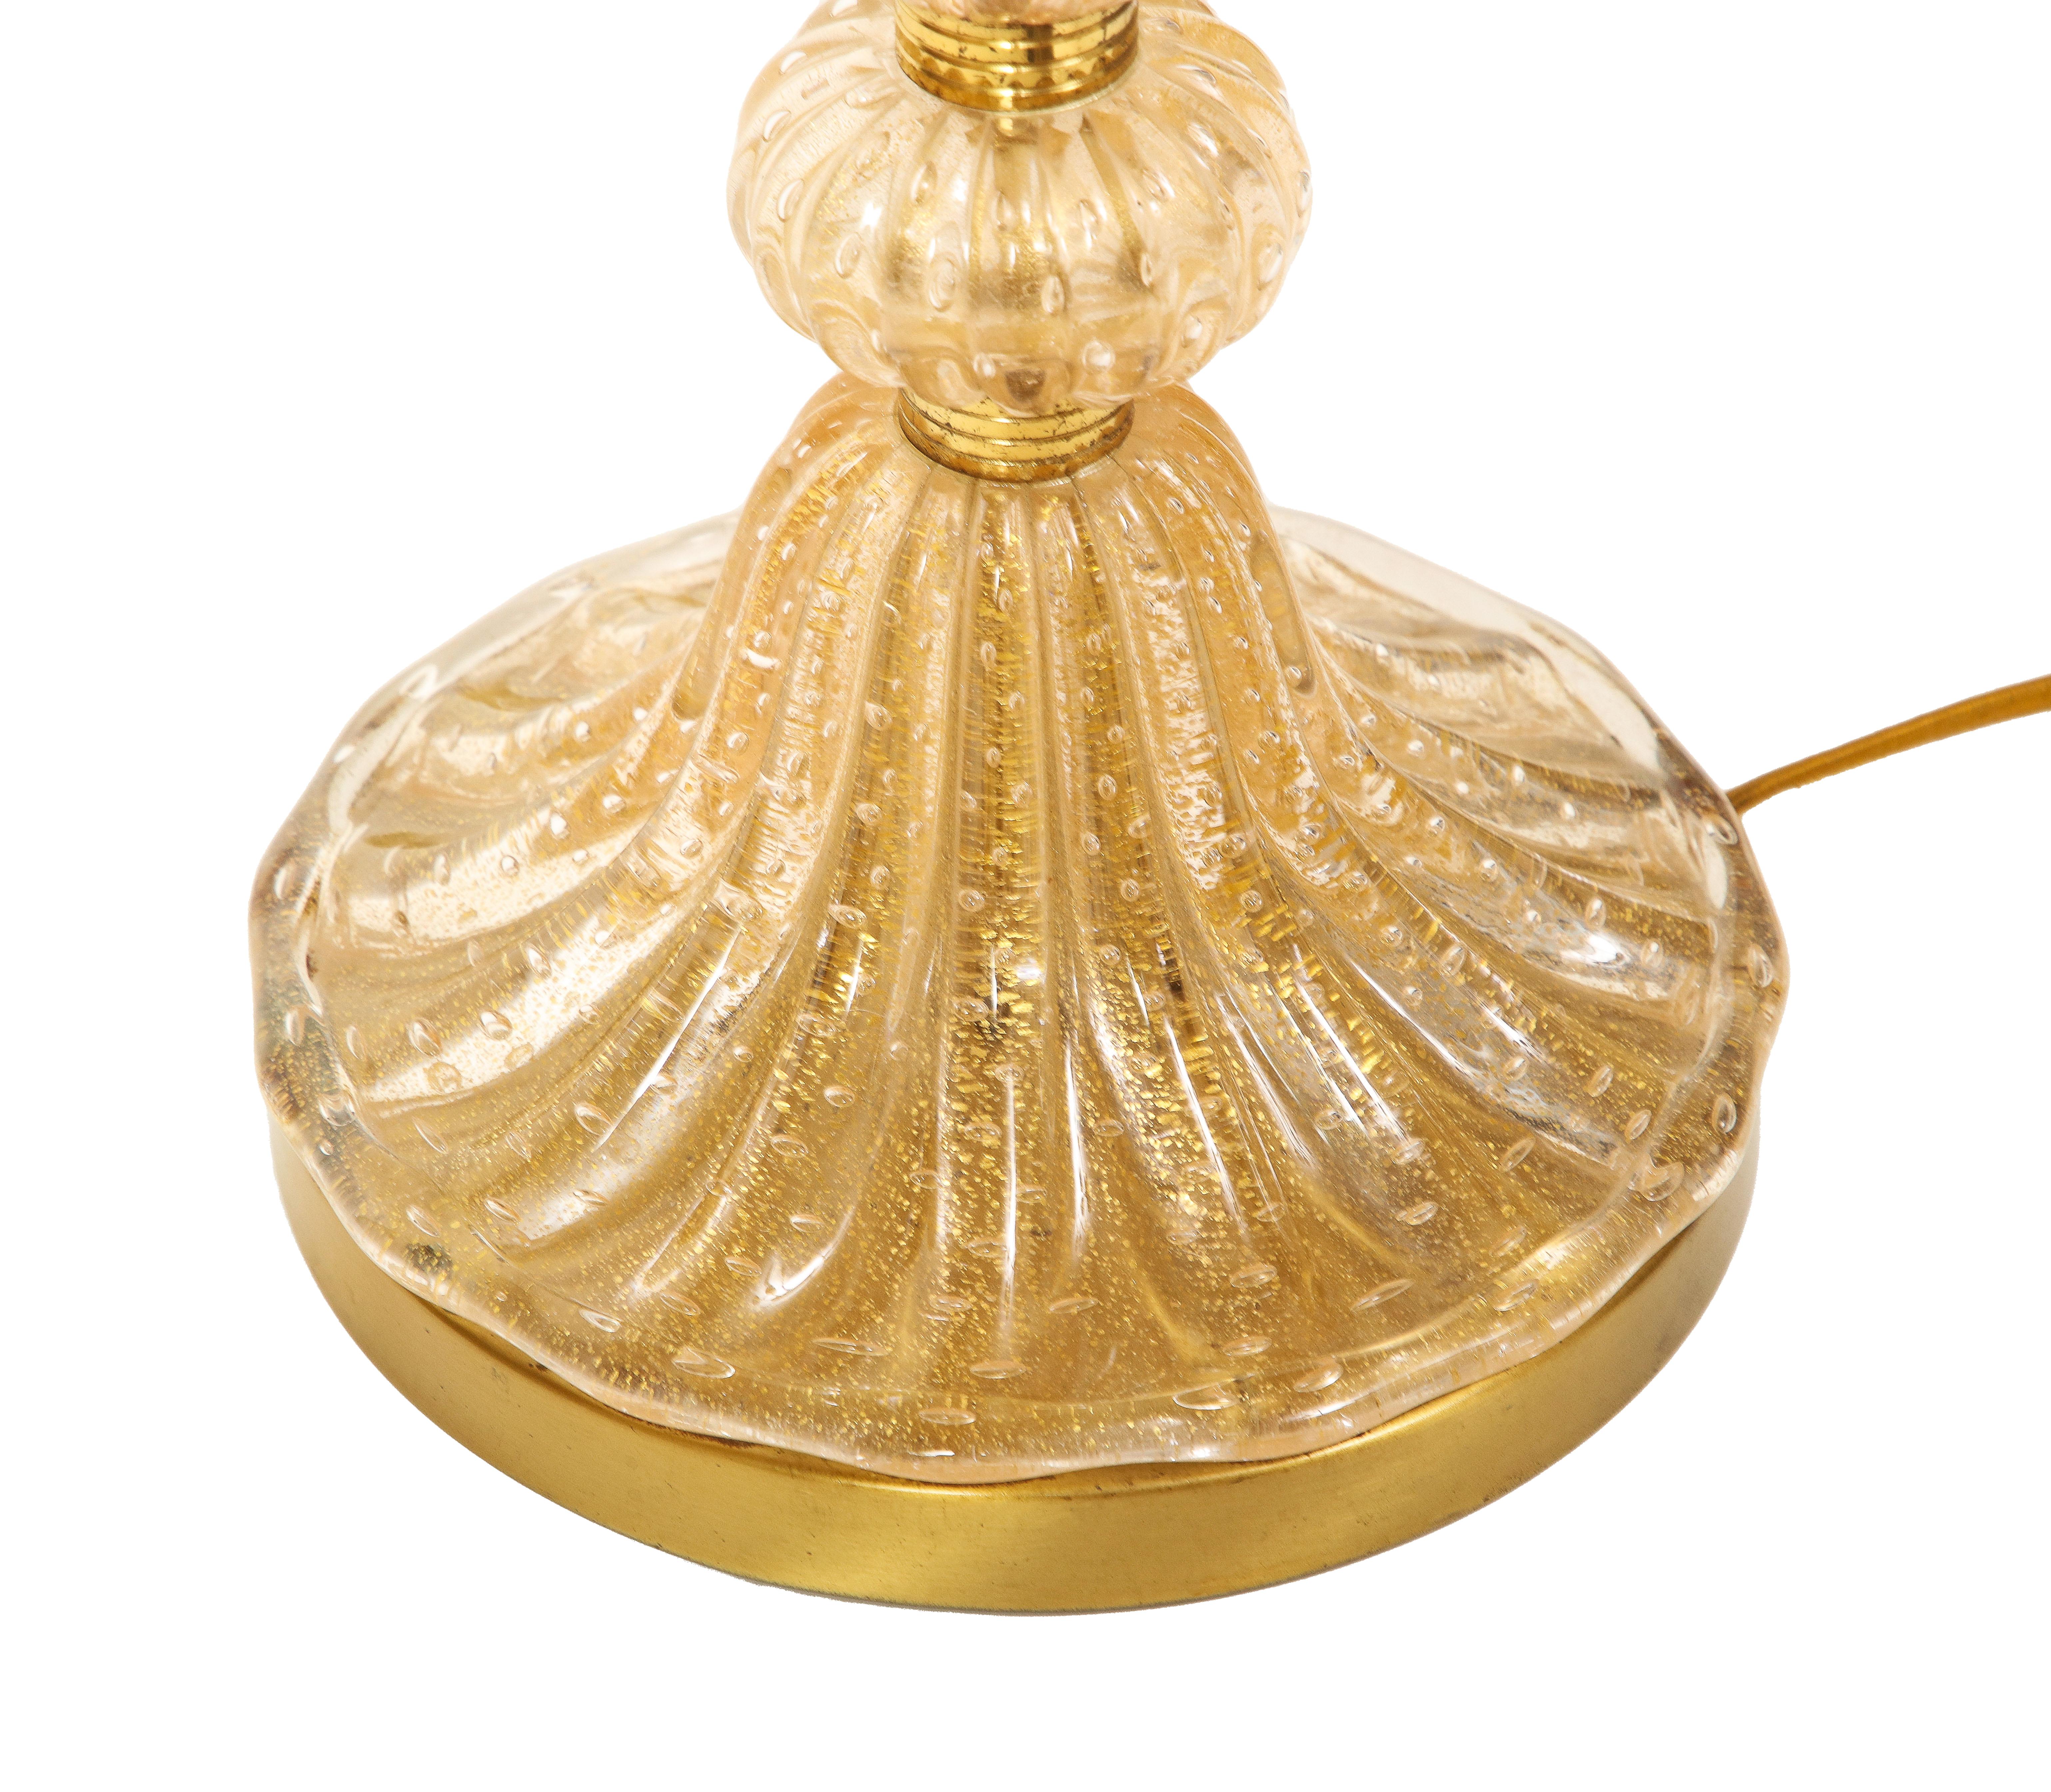 Barovier & Toso Murano Bullicante Glass Table Lamp with Avventurina, 1950s In Good Condition For Sale In New York, NY